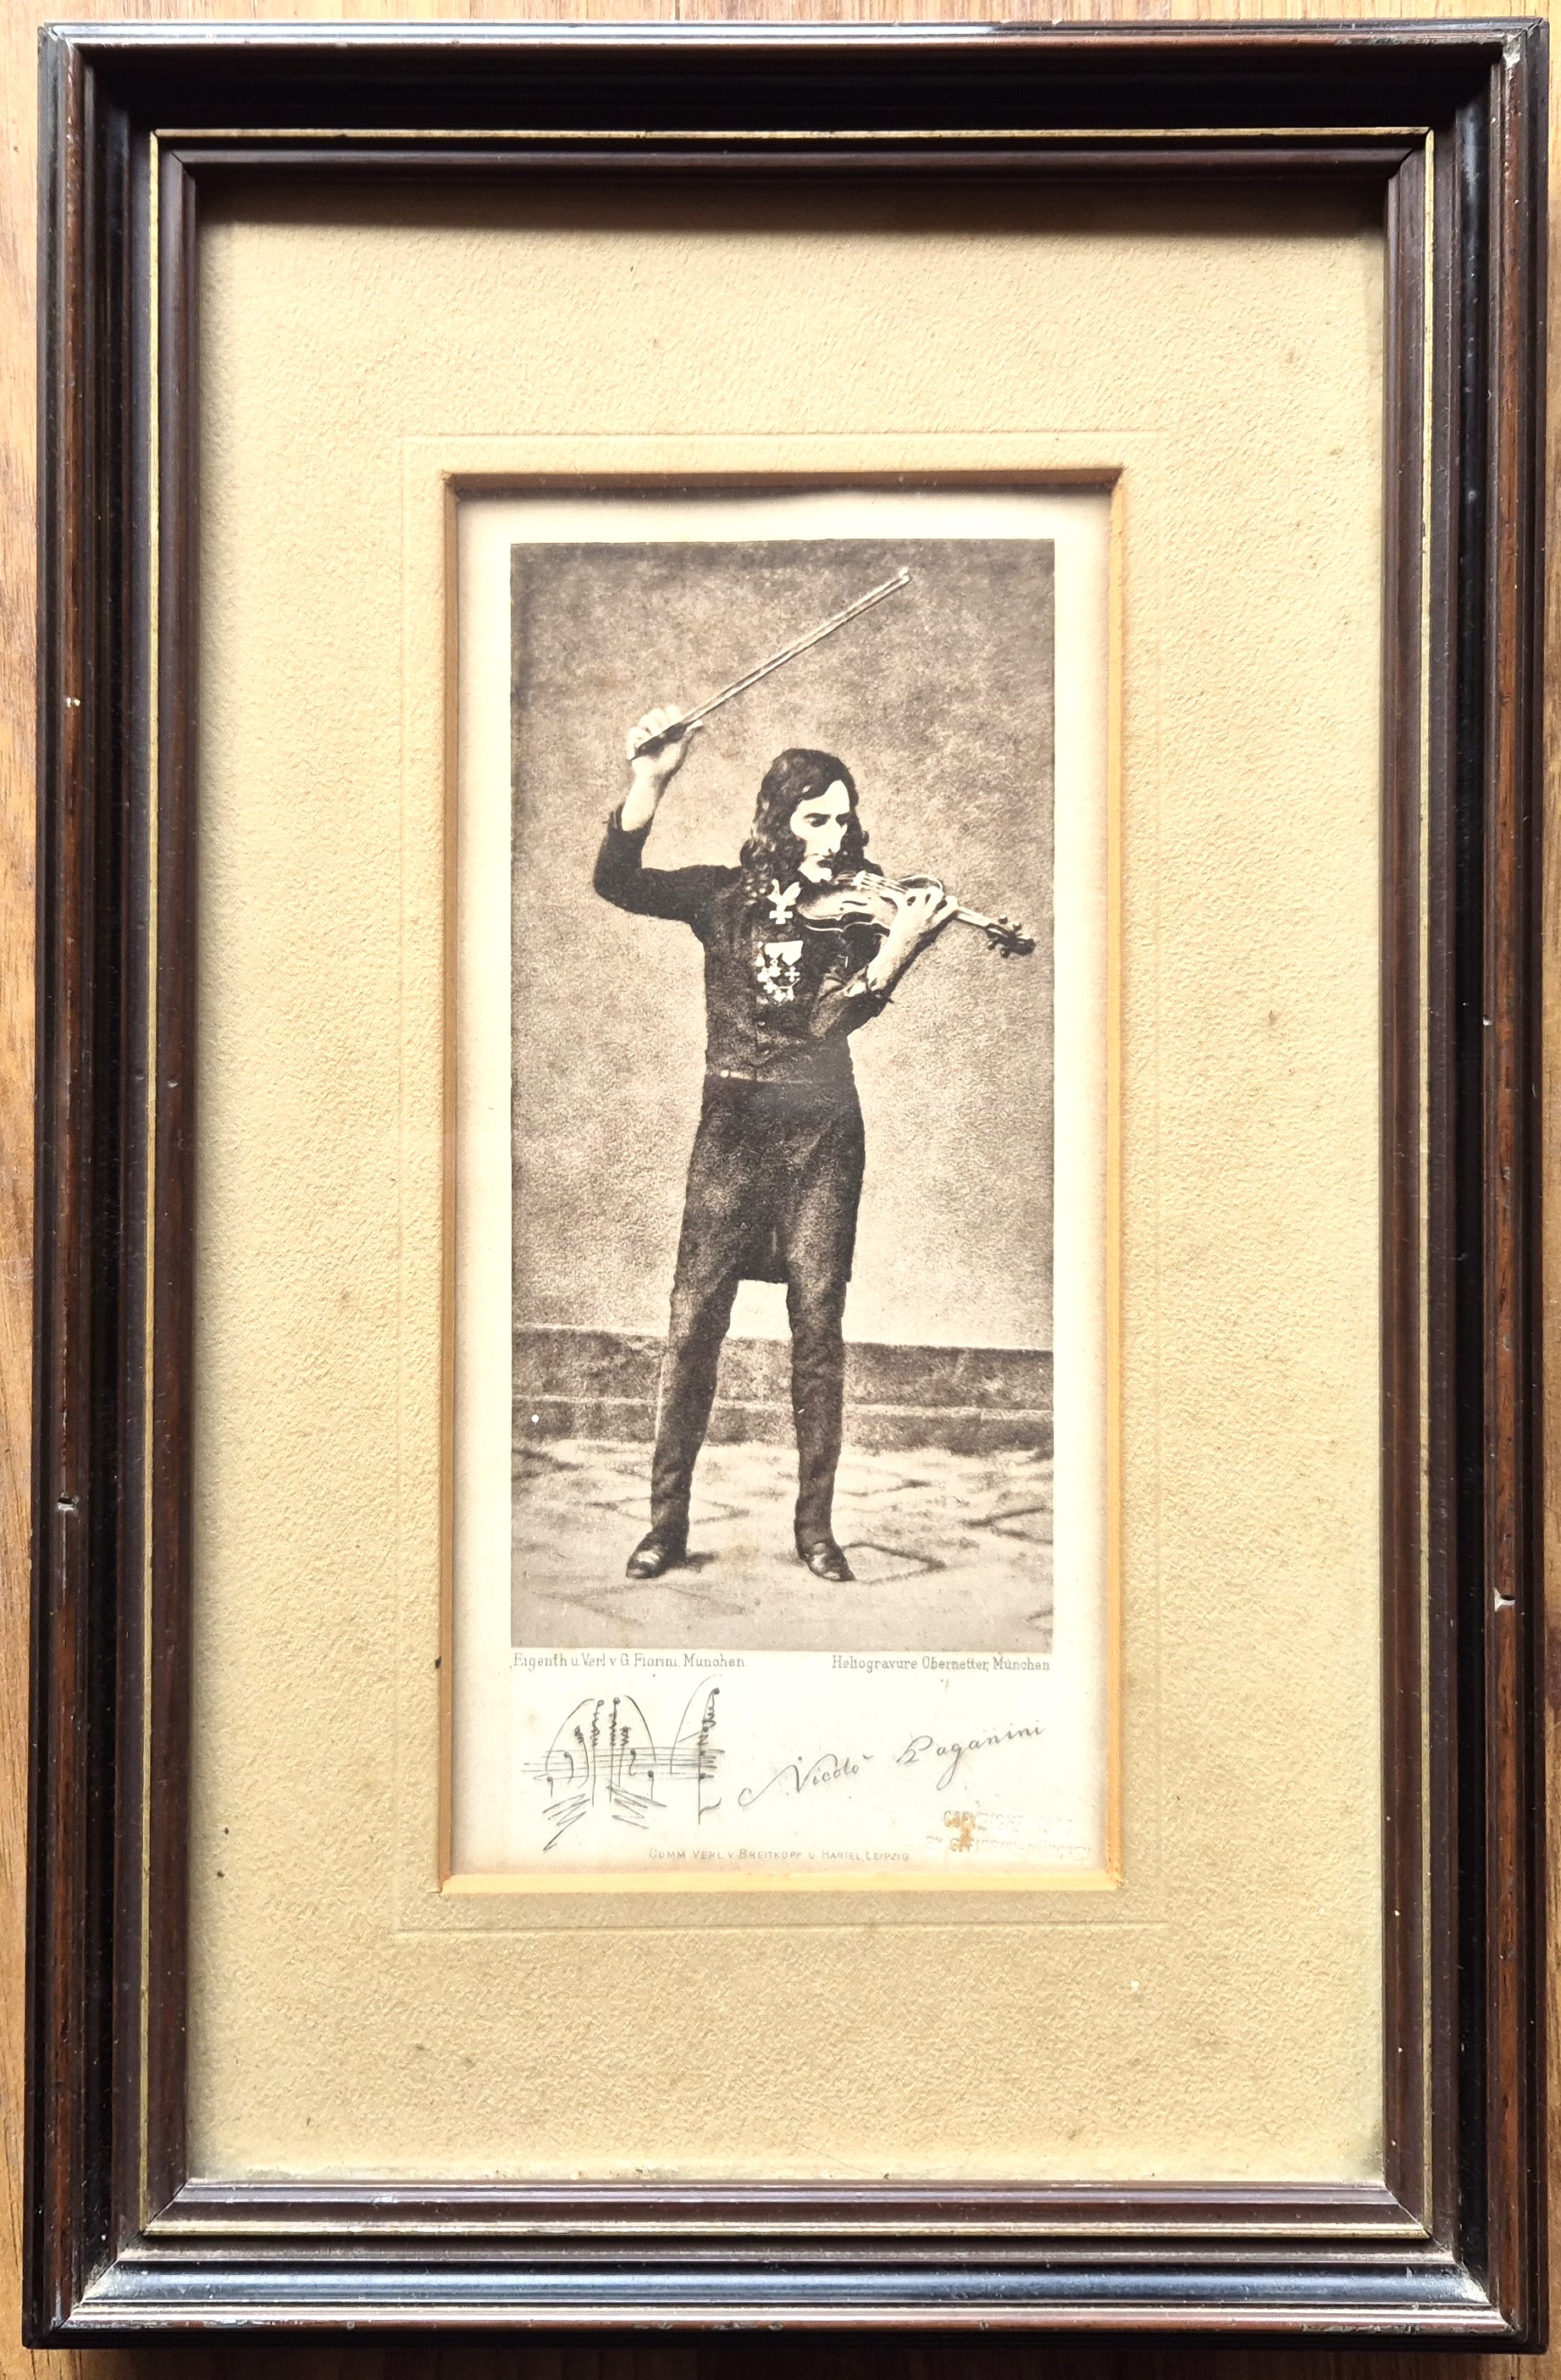 An original faked image of Nicolo Paginini (1782-1840), the Great Violinist full standing playing